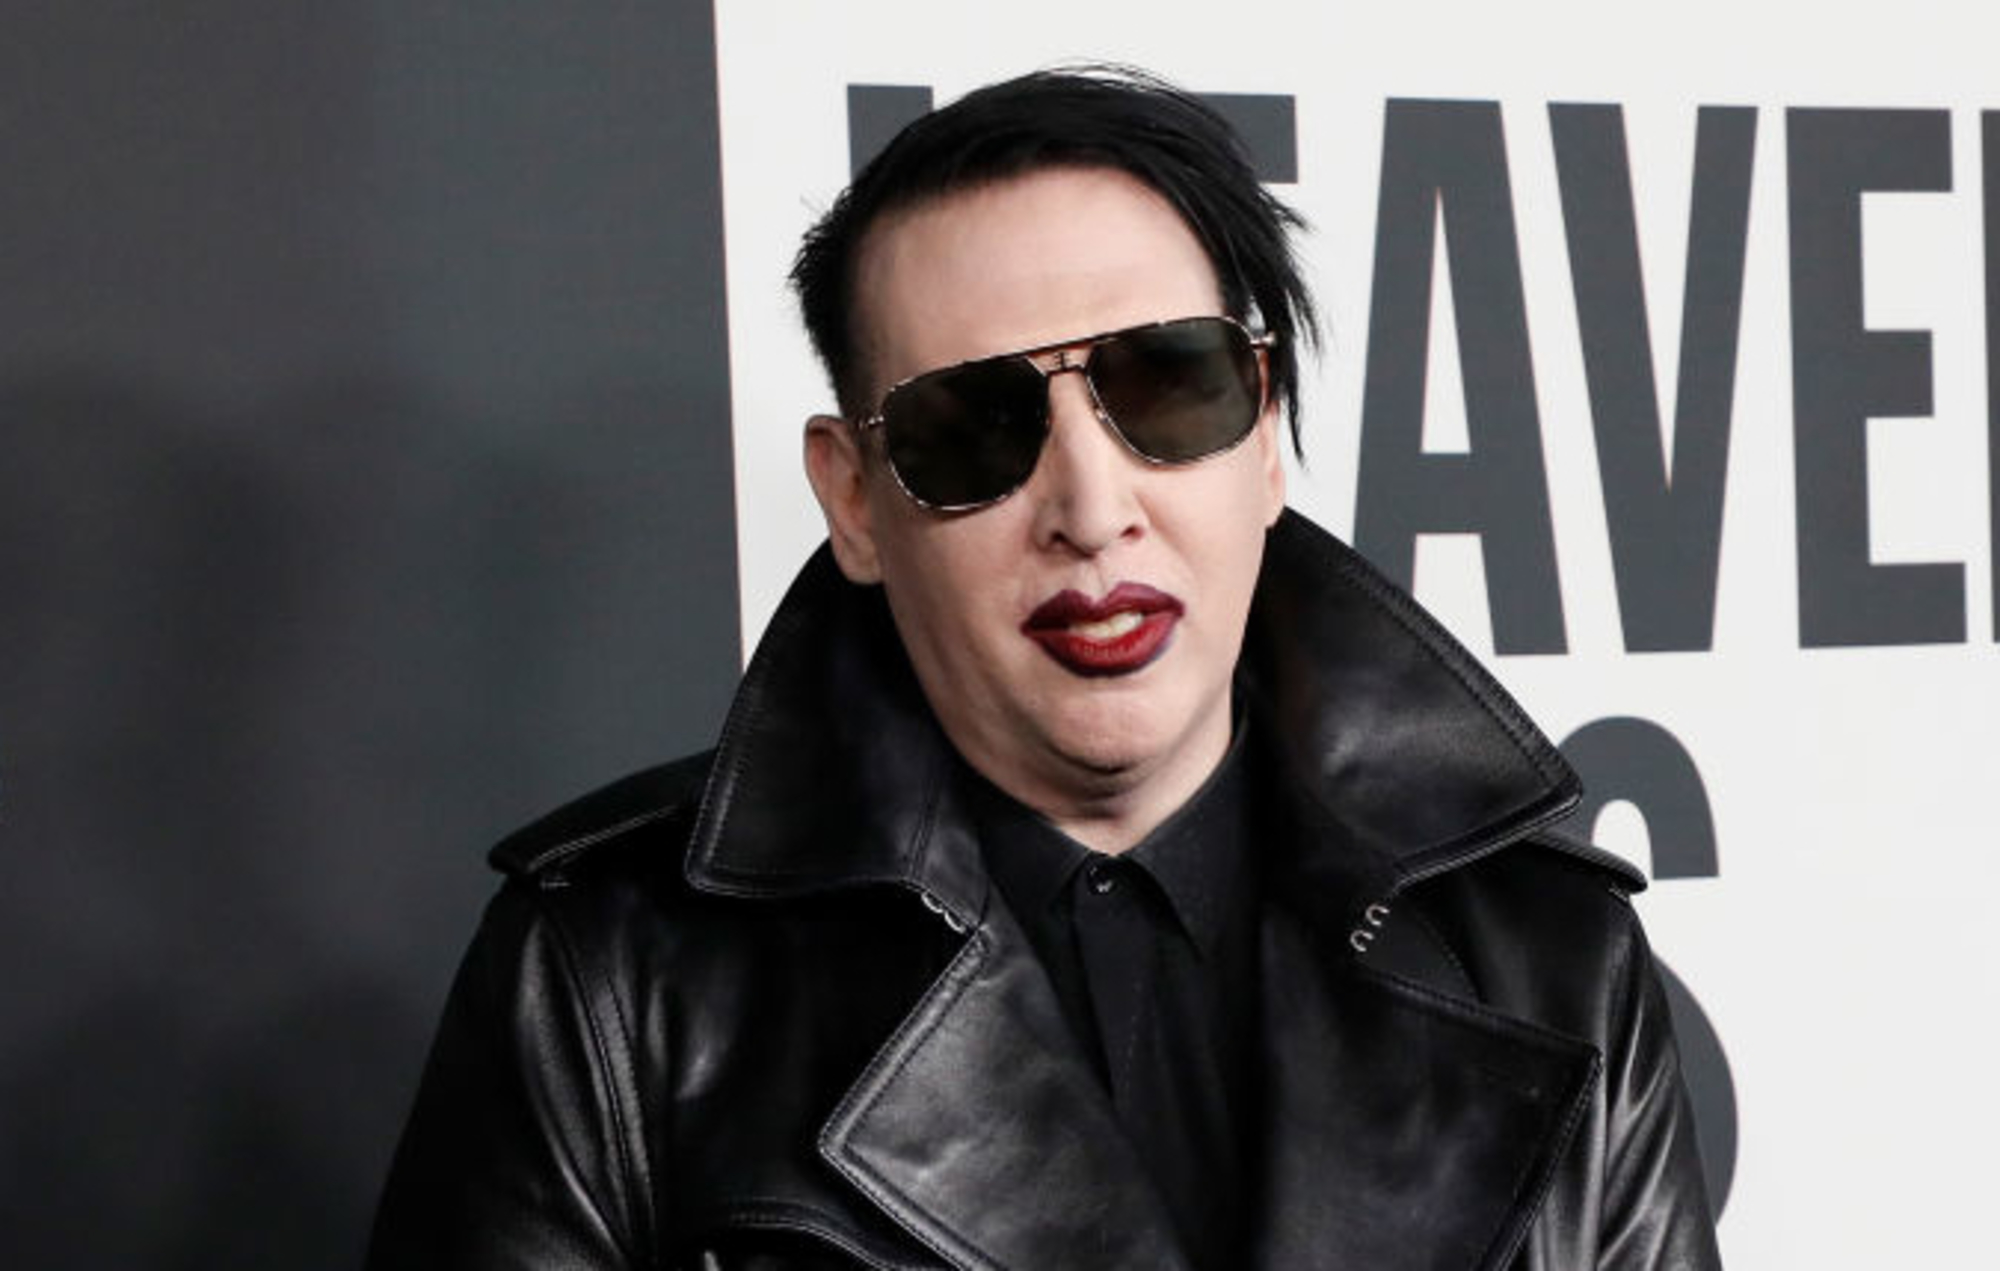 Singer Marilyn Manson estimated net worth at  $5 Million, Sells His Home With ‘Rape Room’ For $1.83M